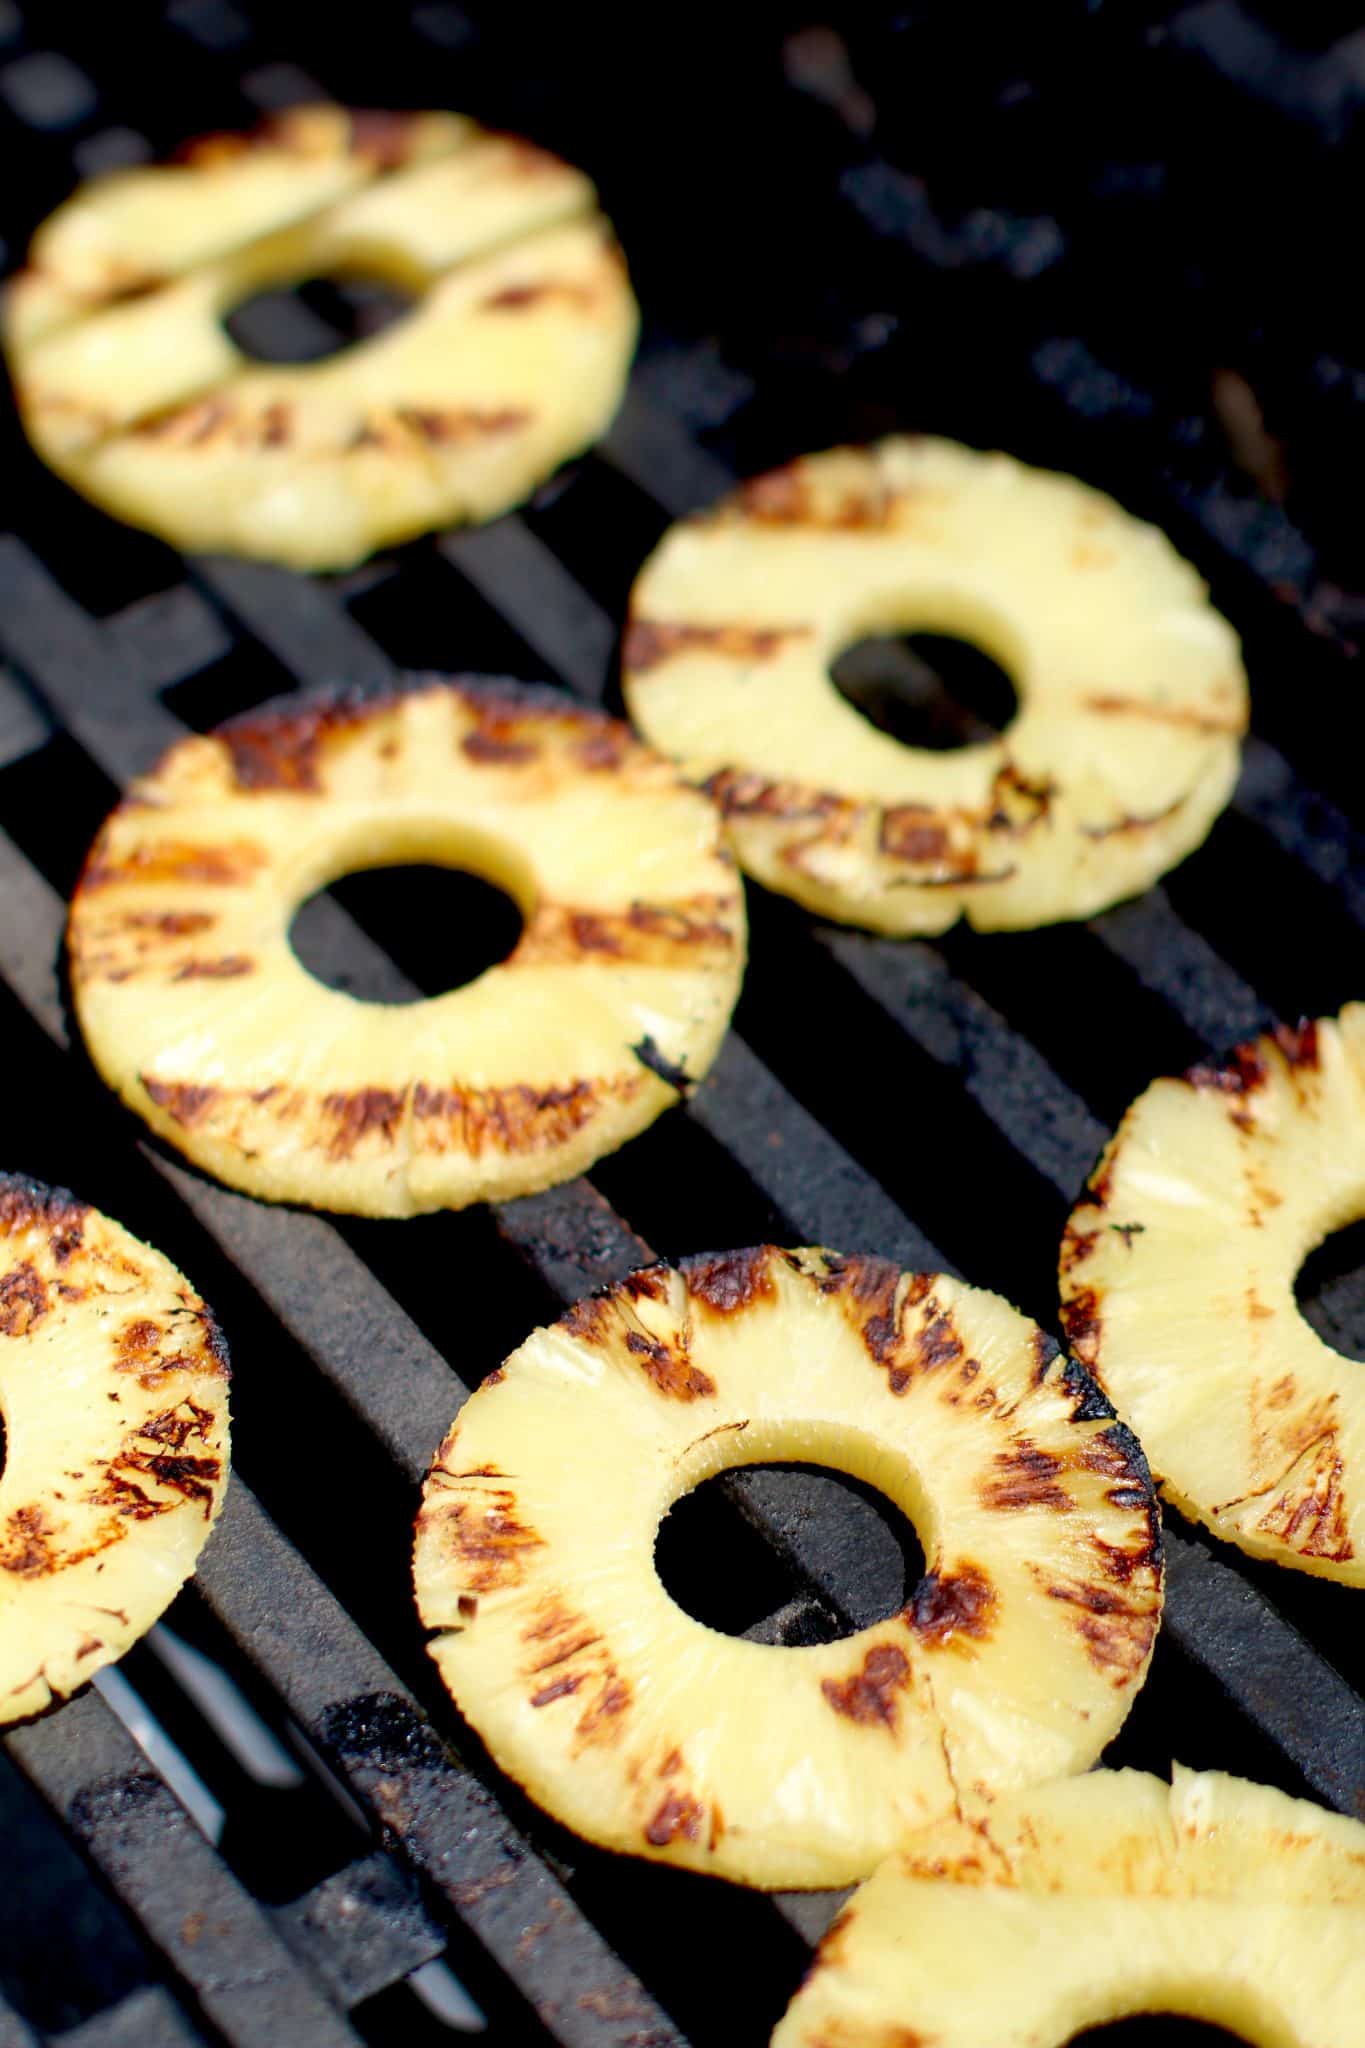 slices of pineapple shown being grilled.